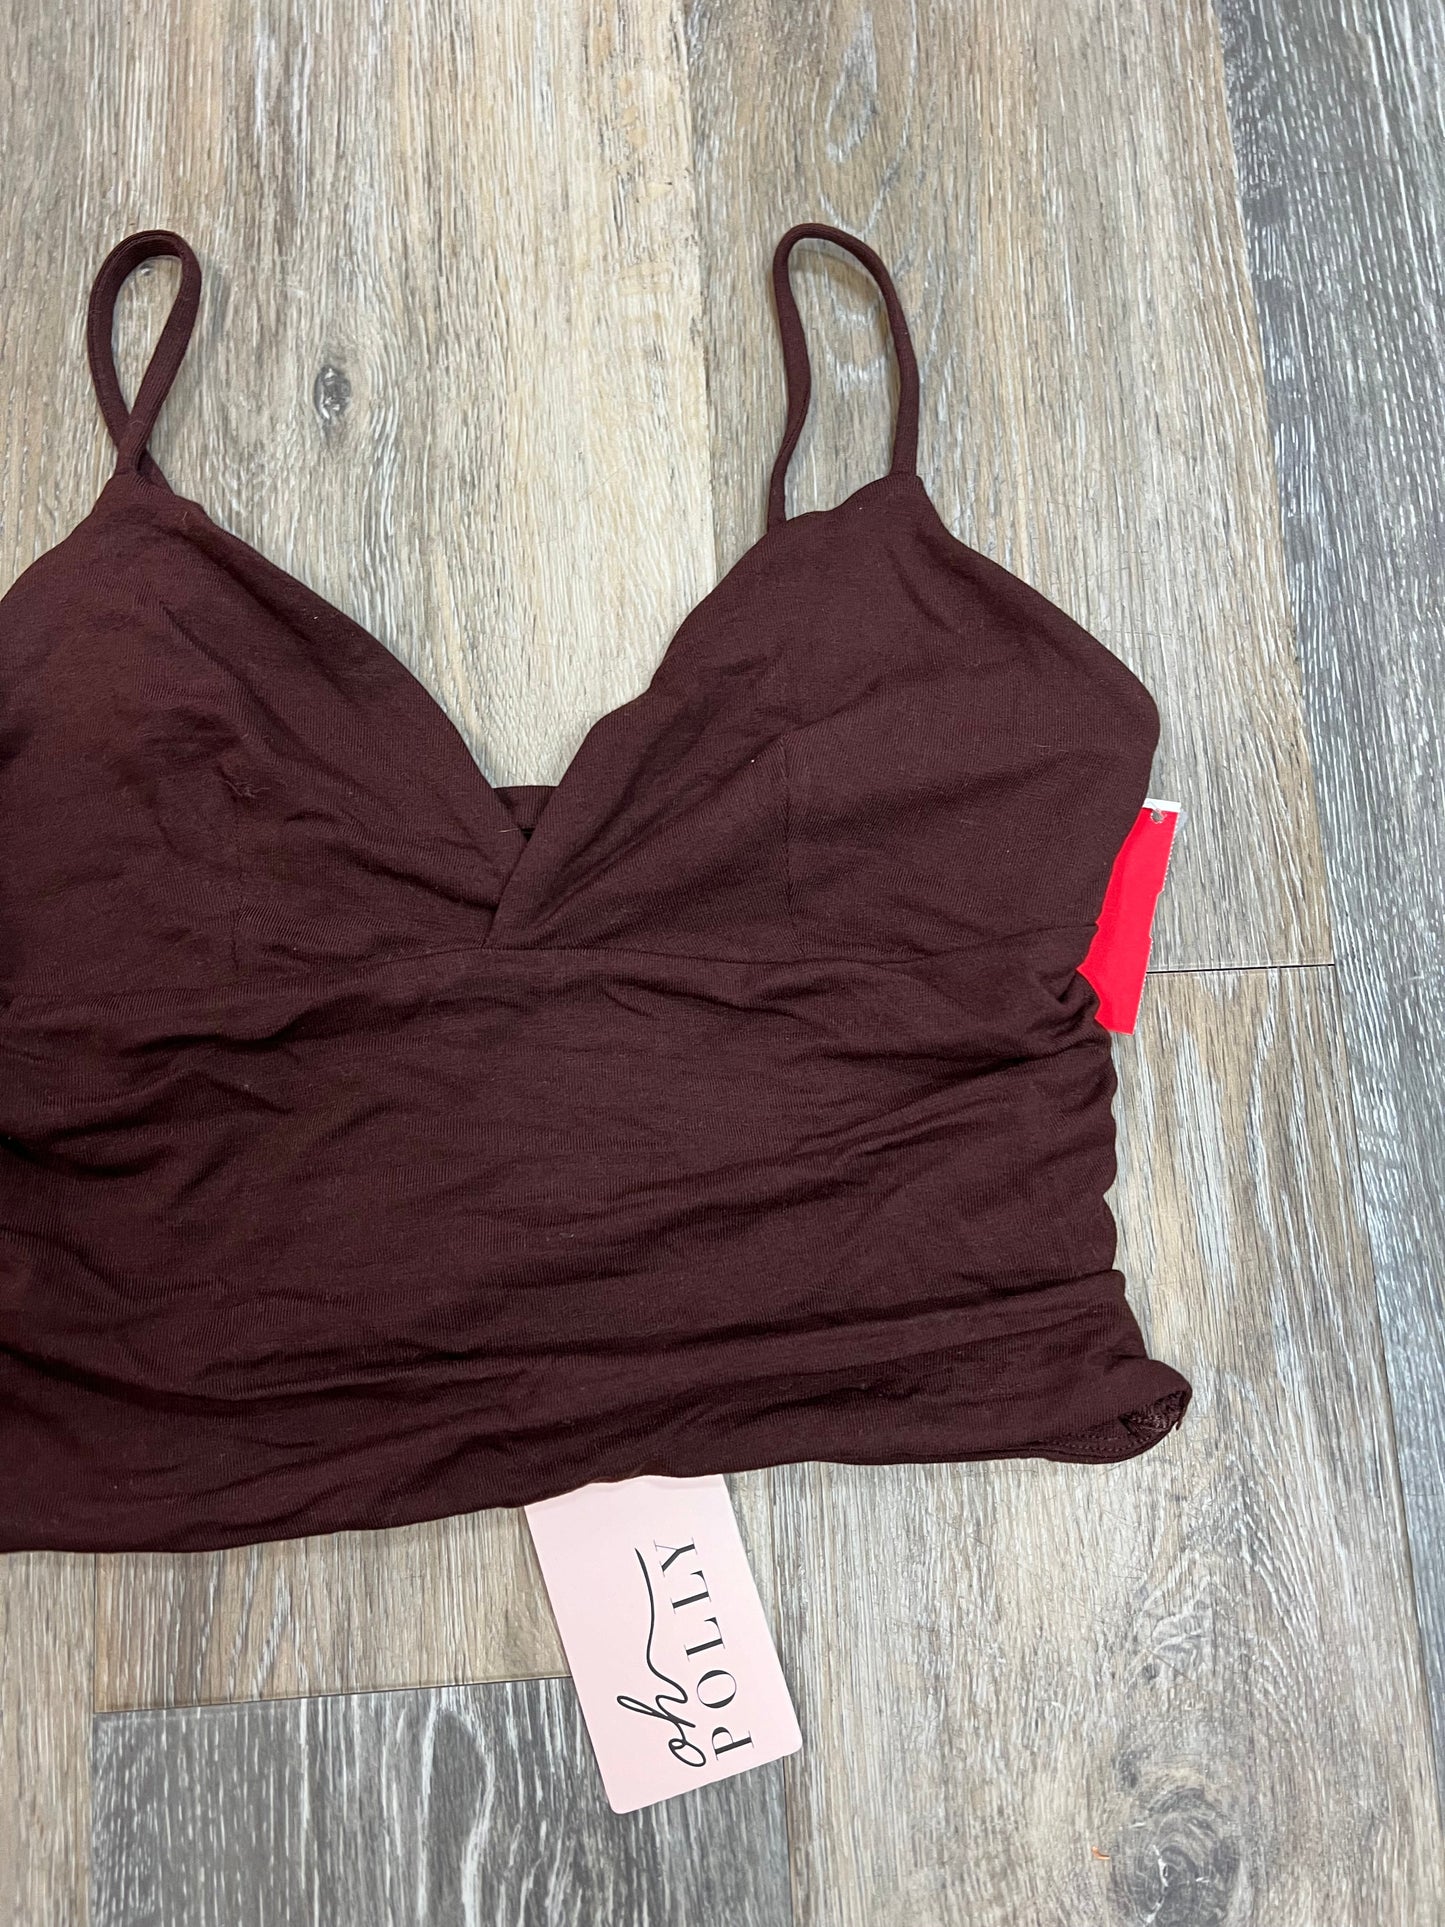 Brown Tank Top Oh Polly, Size S